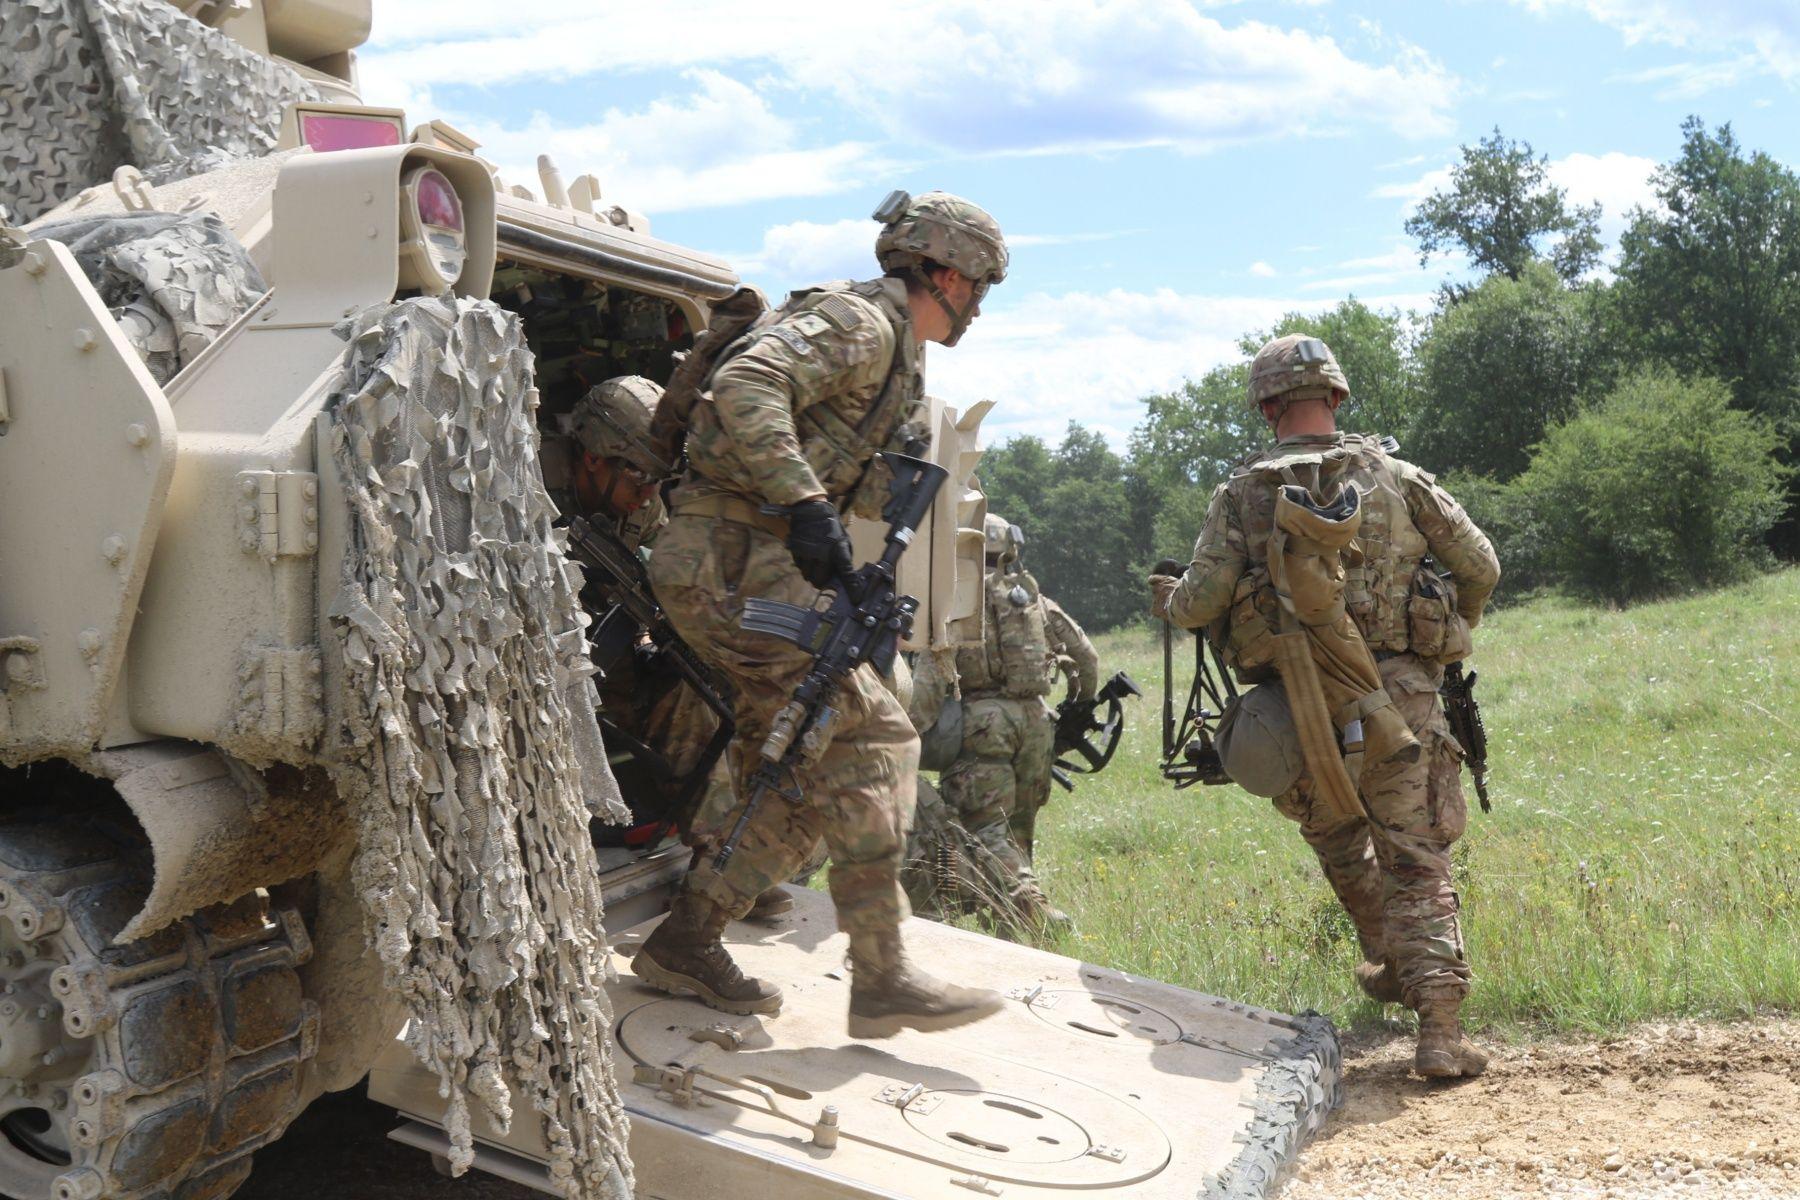 1-68 AR Silver Lion Logo - 1-68 AR sharpens readiness during live-fire exercise | Article | The ...